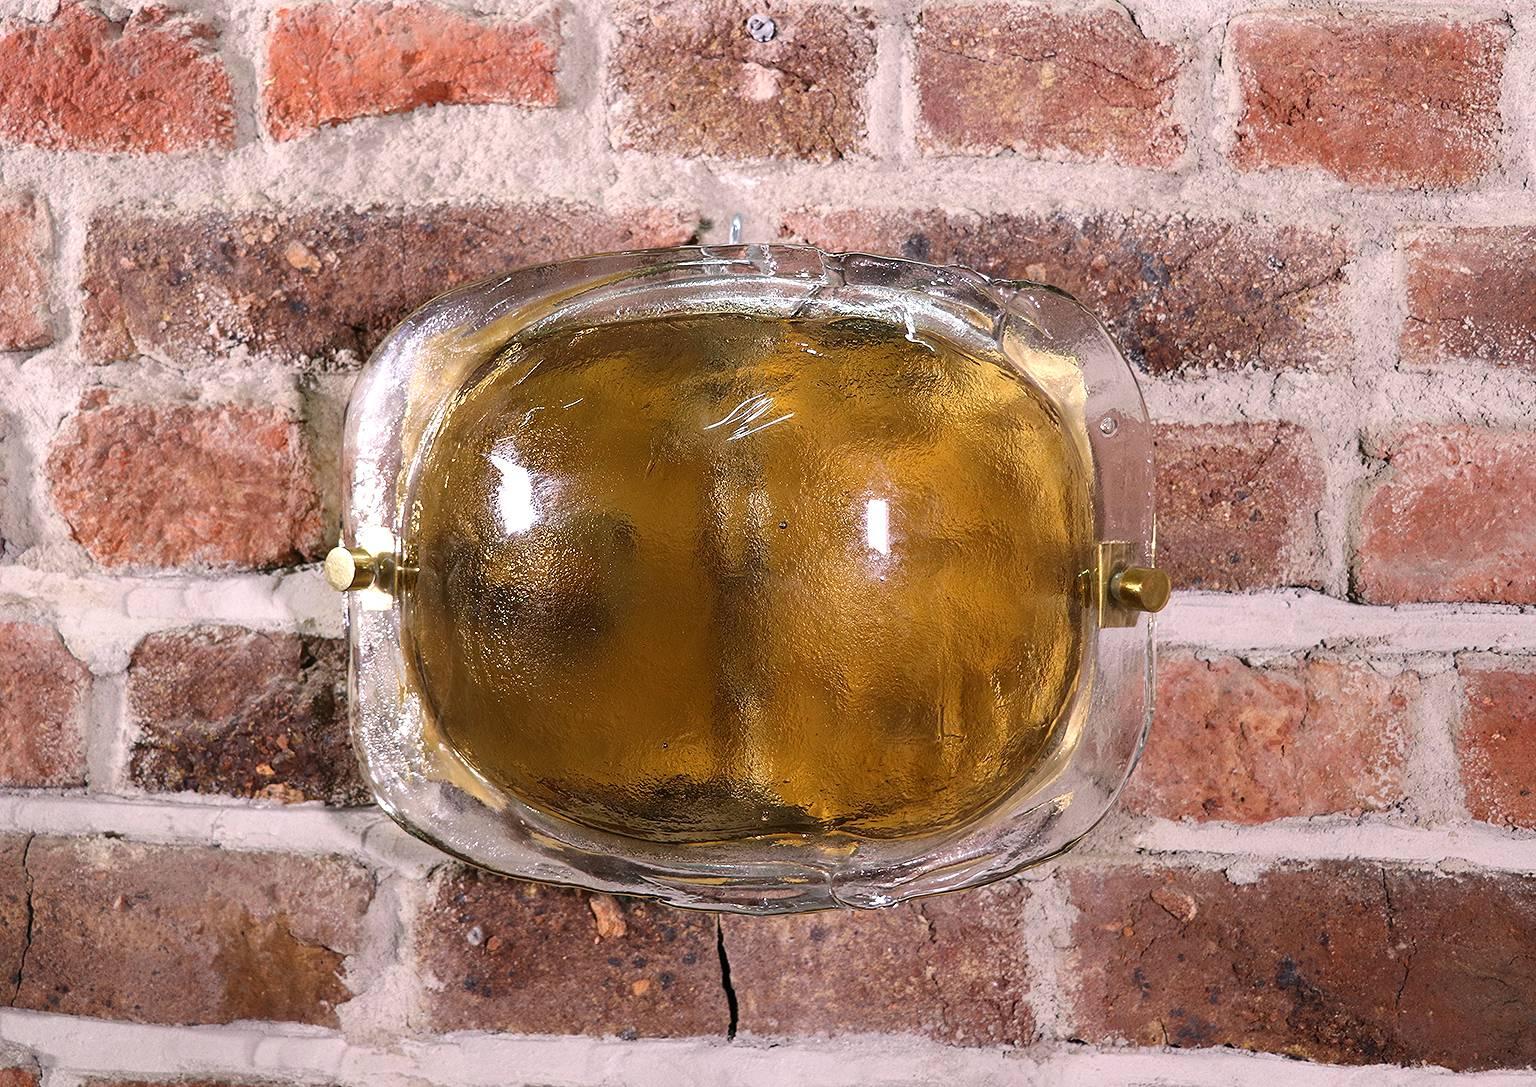 Pair of amber Murano glass wall sconces made by Kaiser Leuchten, Germany in the 1960s.
Very heavy, thick amber glass elements, each frame with one large Edison base bulb.
Two pairs are available. The price is for one pair.
      